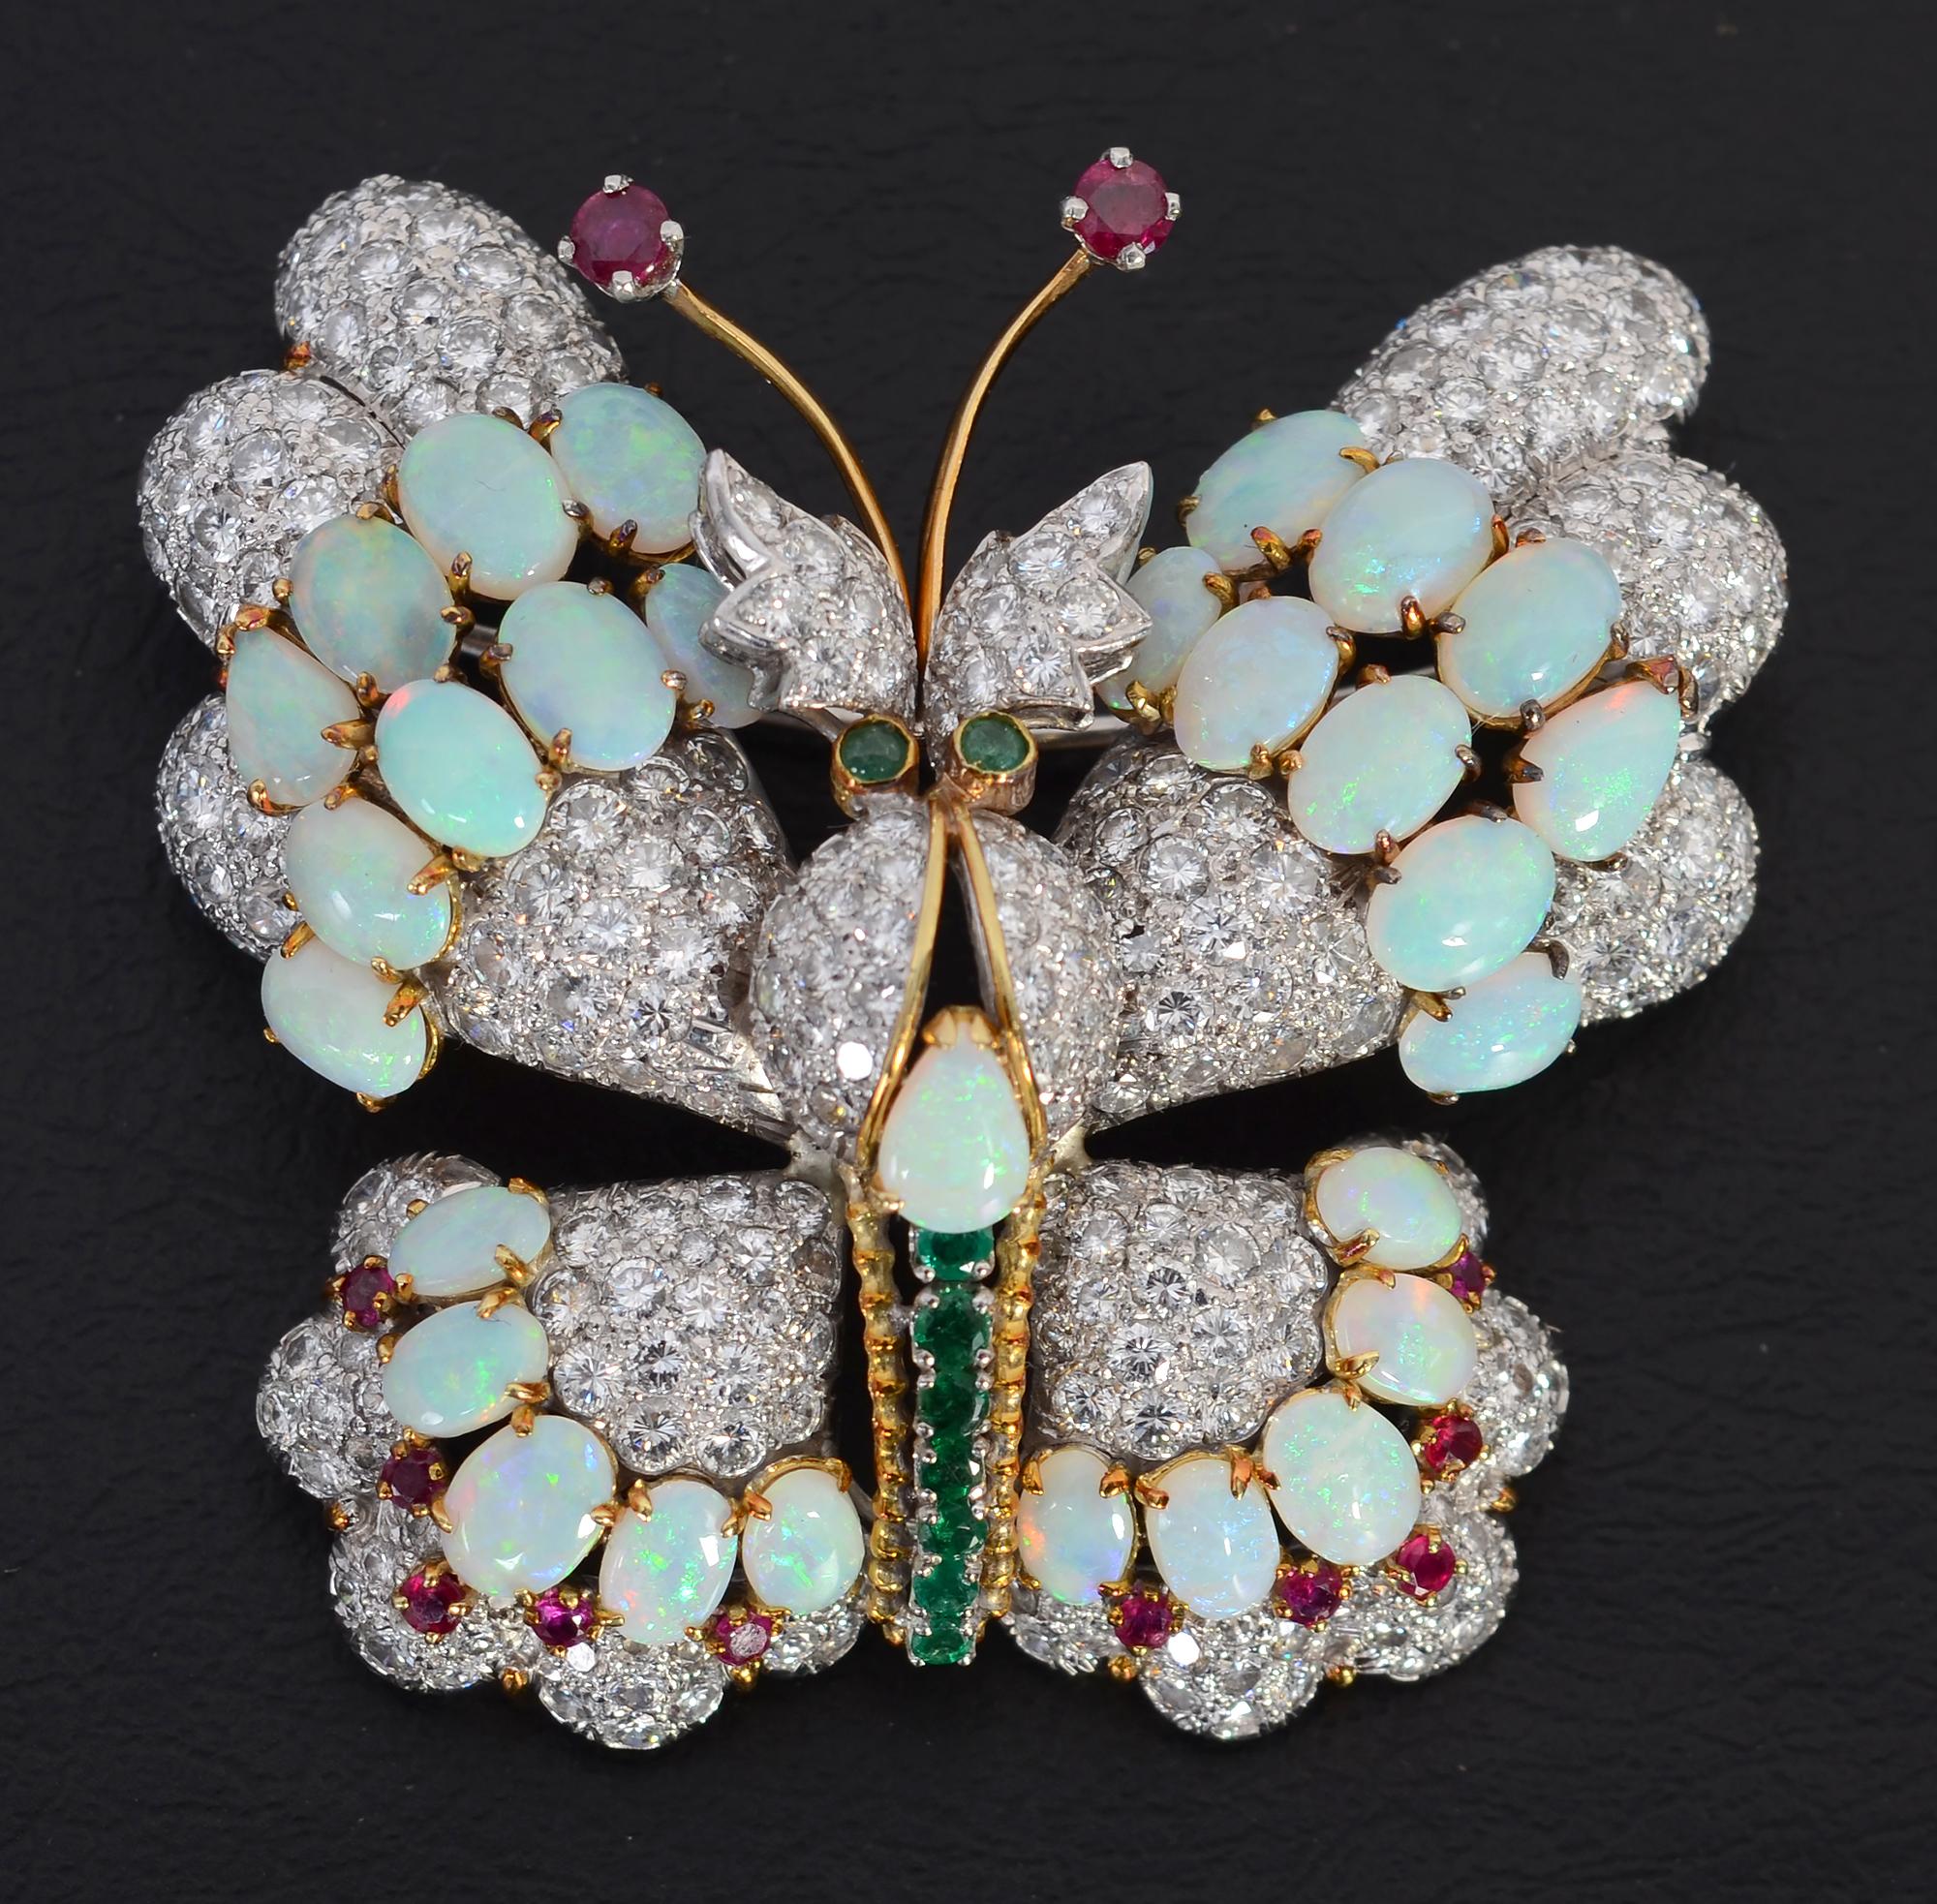 Exquisite, elegant butterfly brooch by Hammerman Brothers. The brooch consists of 282 diamonds weighing a total of approximately 5 carats; opals; emeralds and rubies. The opals are very effective in conveying the iridescence of butterfly wings. The